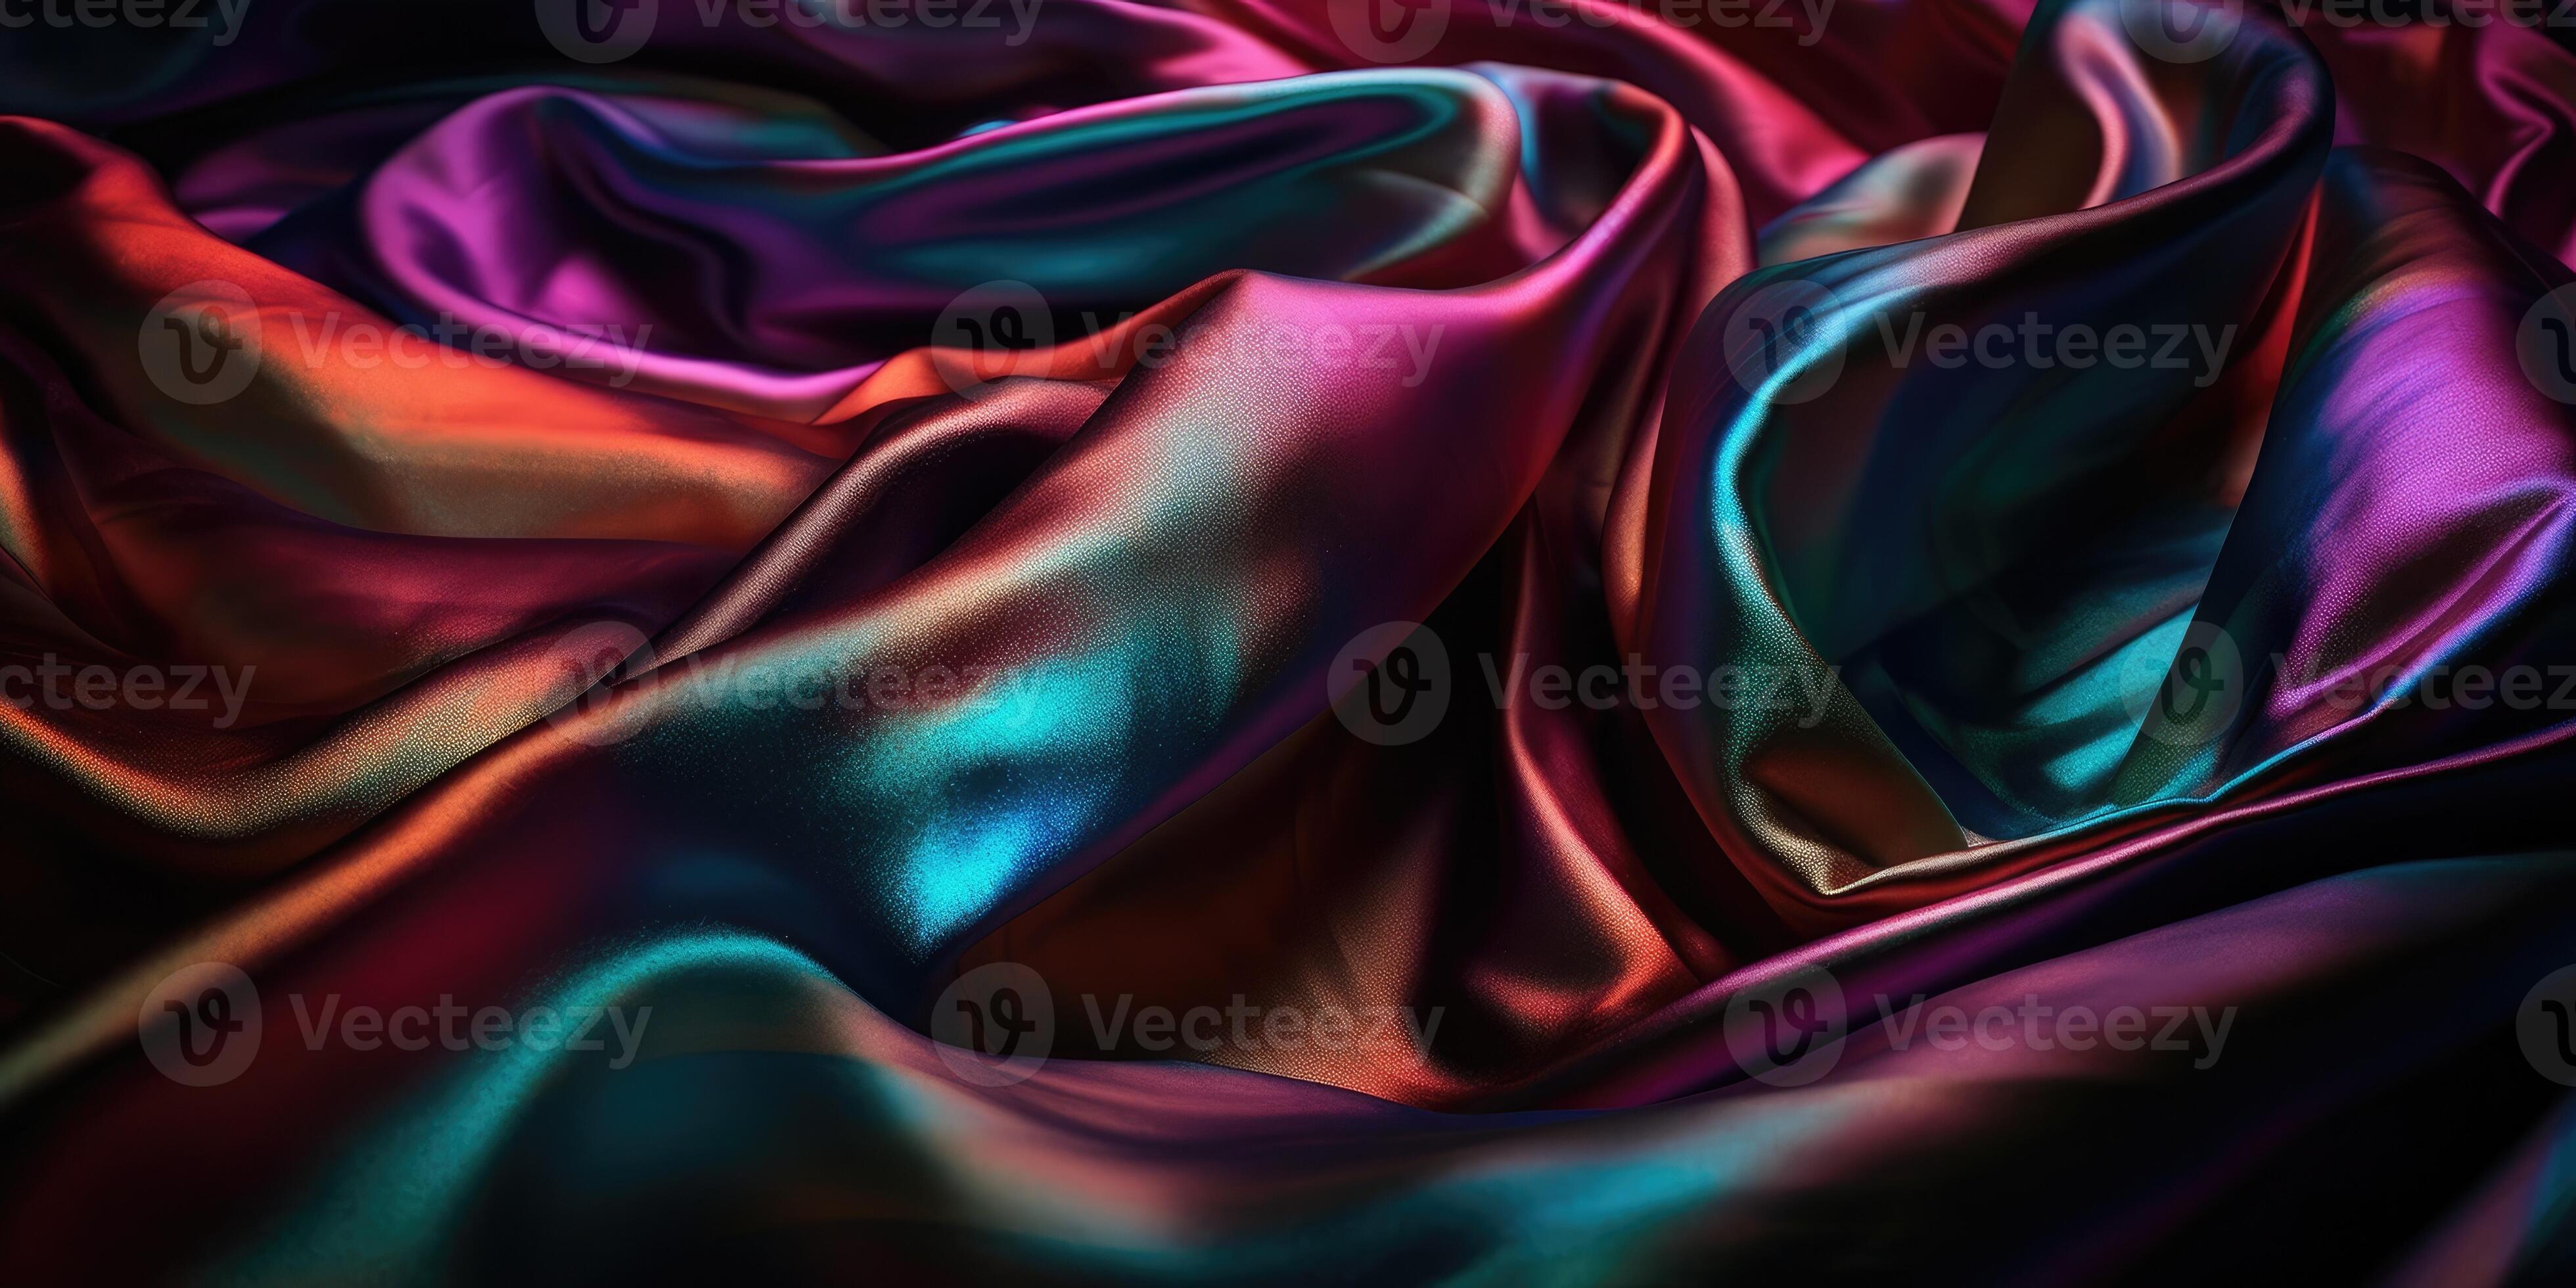 https://static.vecteezy.com/system/resources/previews/022/160/344/large_2x/luxury-silk-fabric-wallpaper-with-wrinkles-and-folds-digital-iridescent-and-wavy-material-background-liquid-foil-gradient-image-photo.jpg